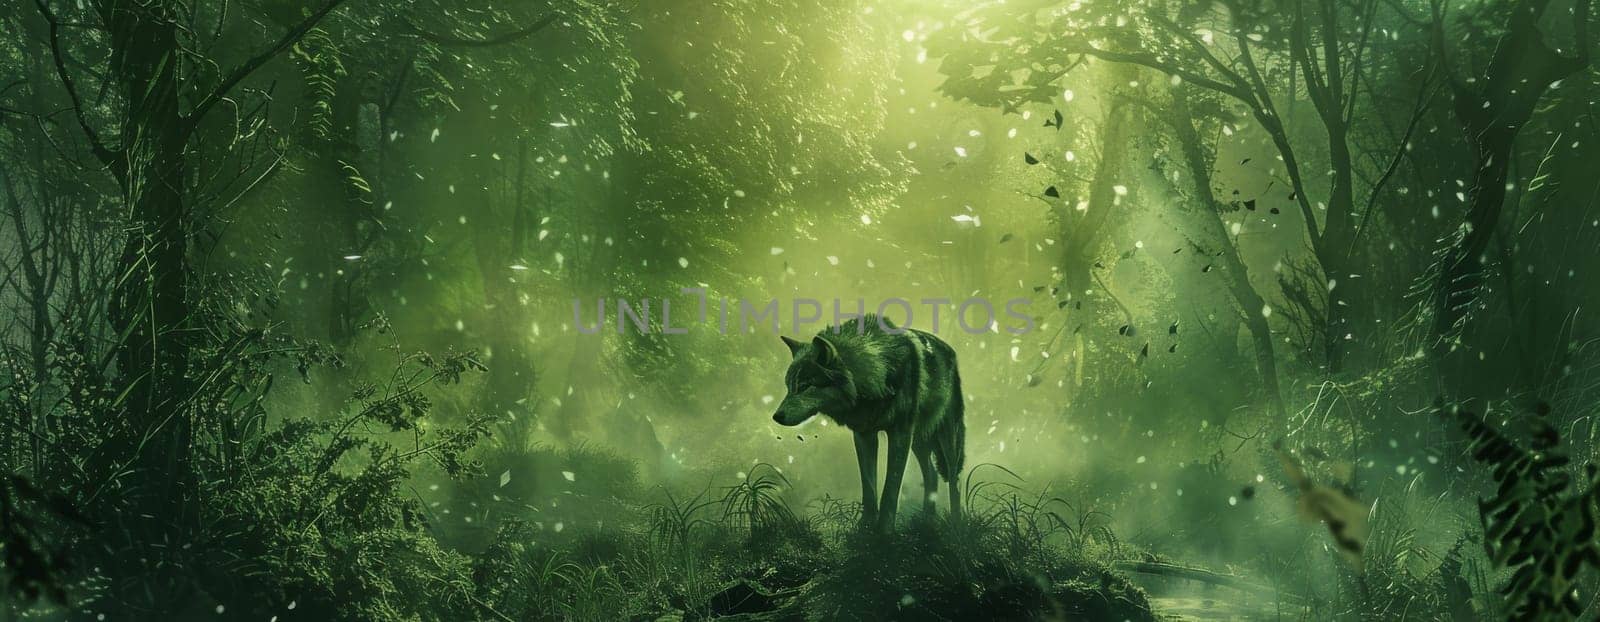 A wolf standing amidst trees in forest setting